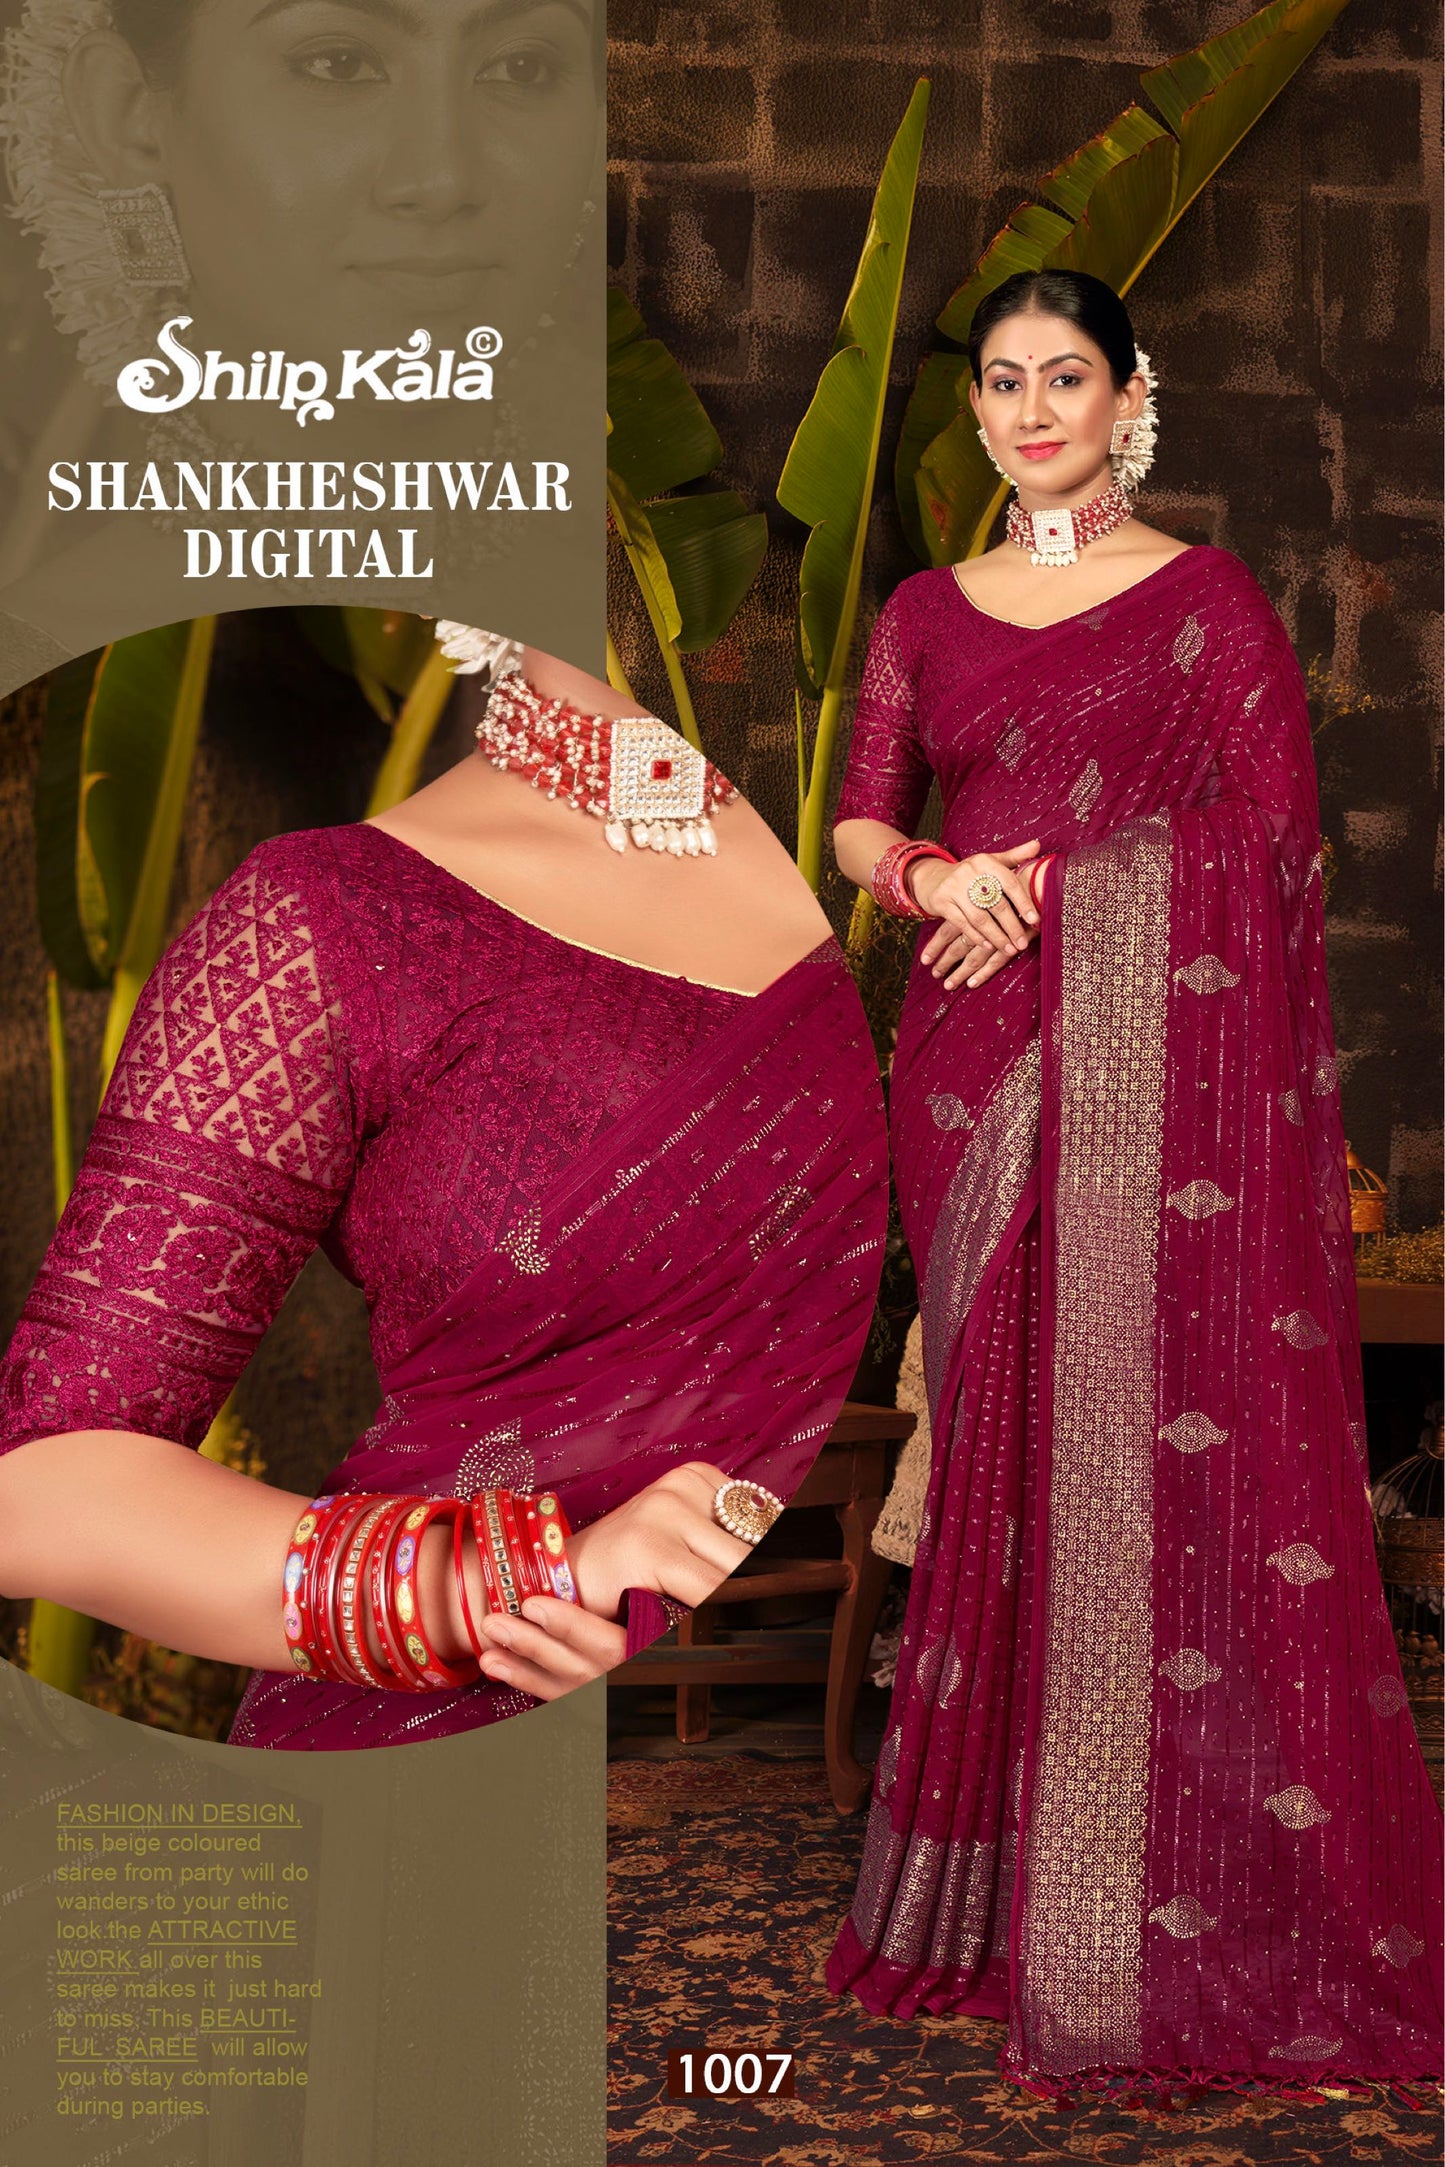 Sankheshwar Multicolour Fancy Rimjhim Saree with Net Blouse and Tone to Tone Matching